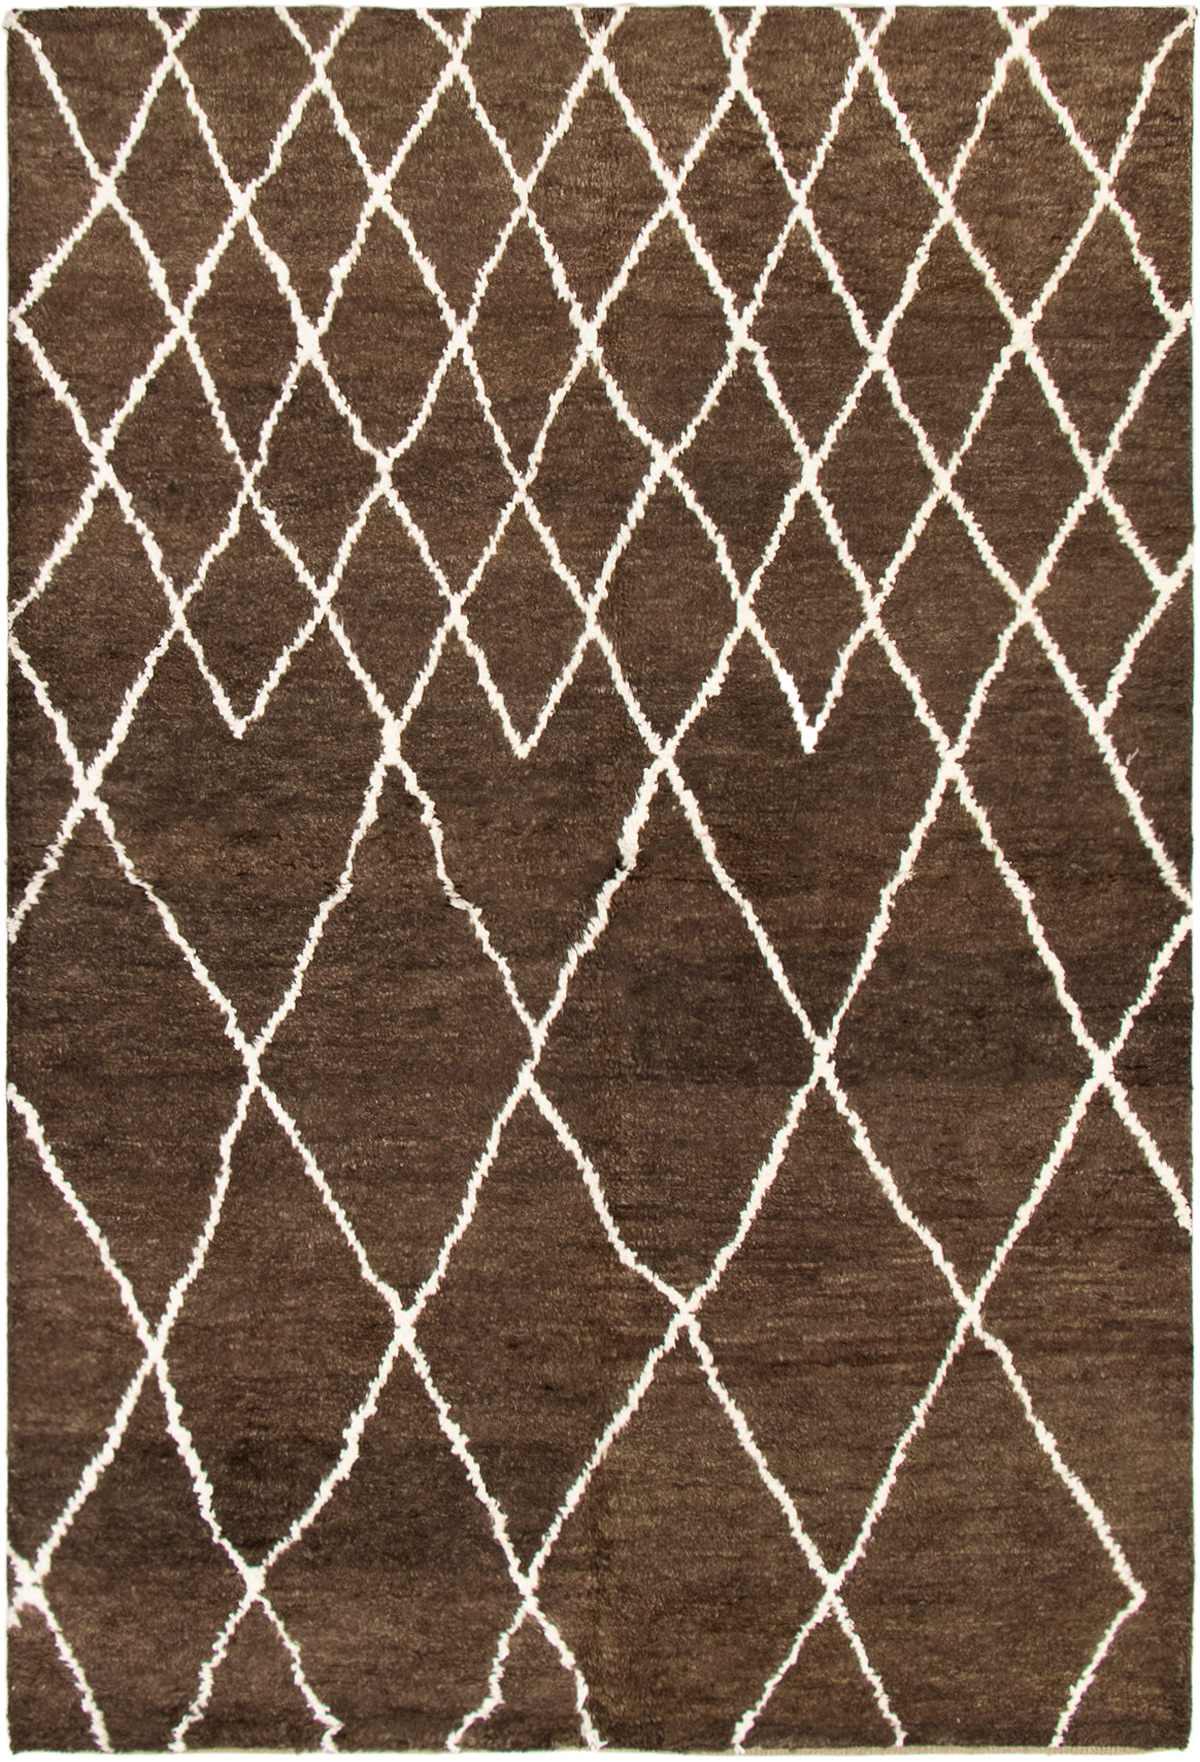 Hand-knotted Arlequin Dark Brown Wool Rug 6'2" x 9'2"  Size: 6'2" x 9'2"  